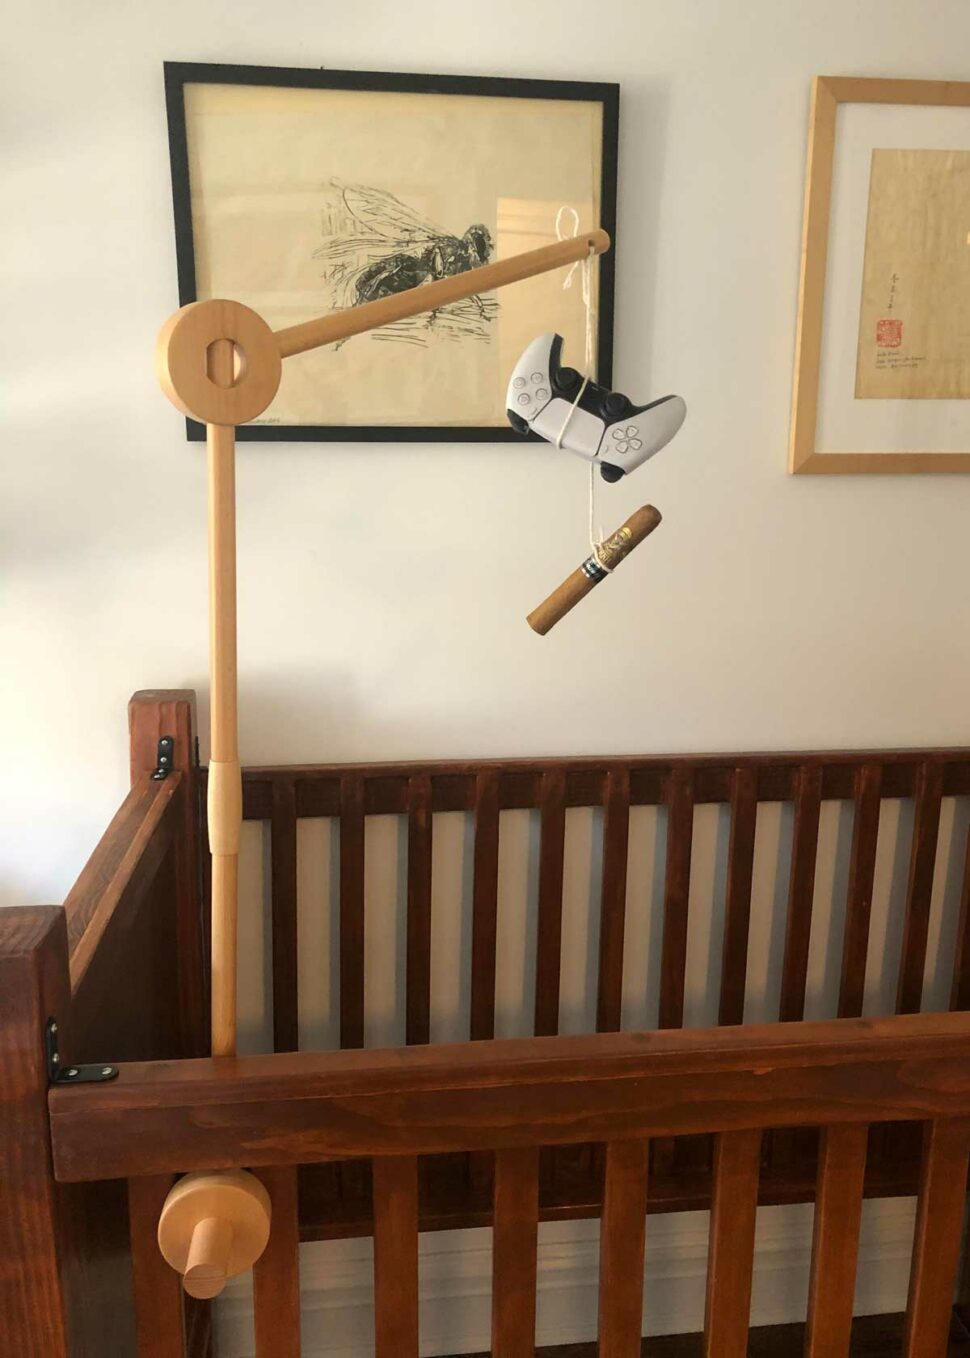 I used up all my creative energy building the crib and was out of ideas when my wife asked for a mobile